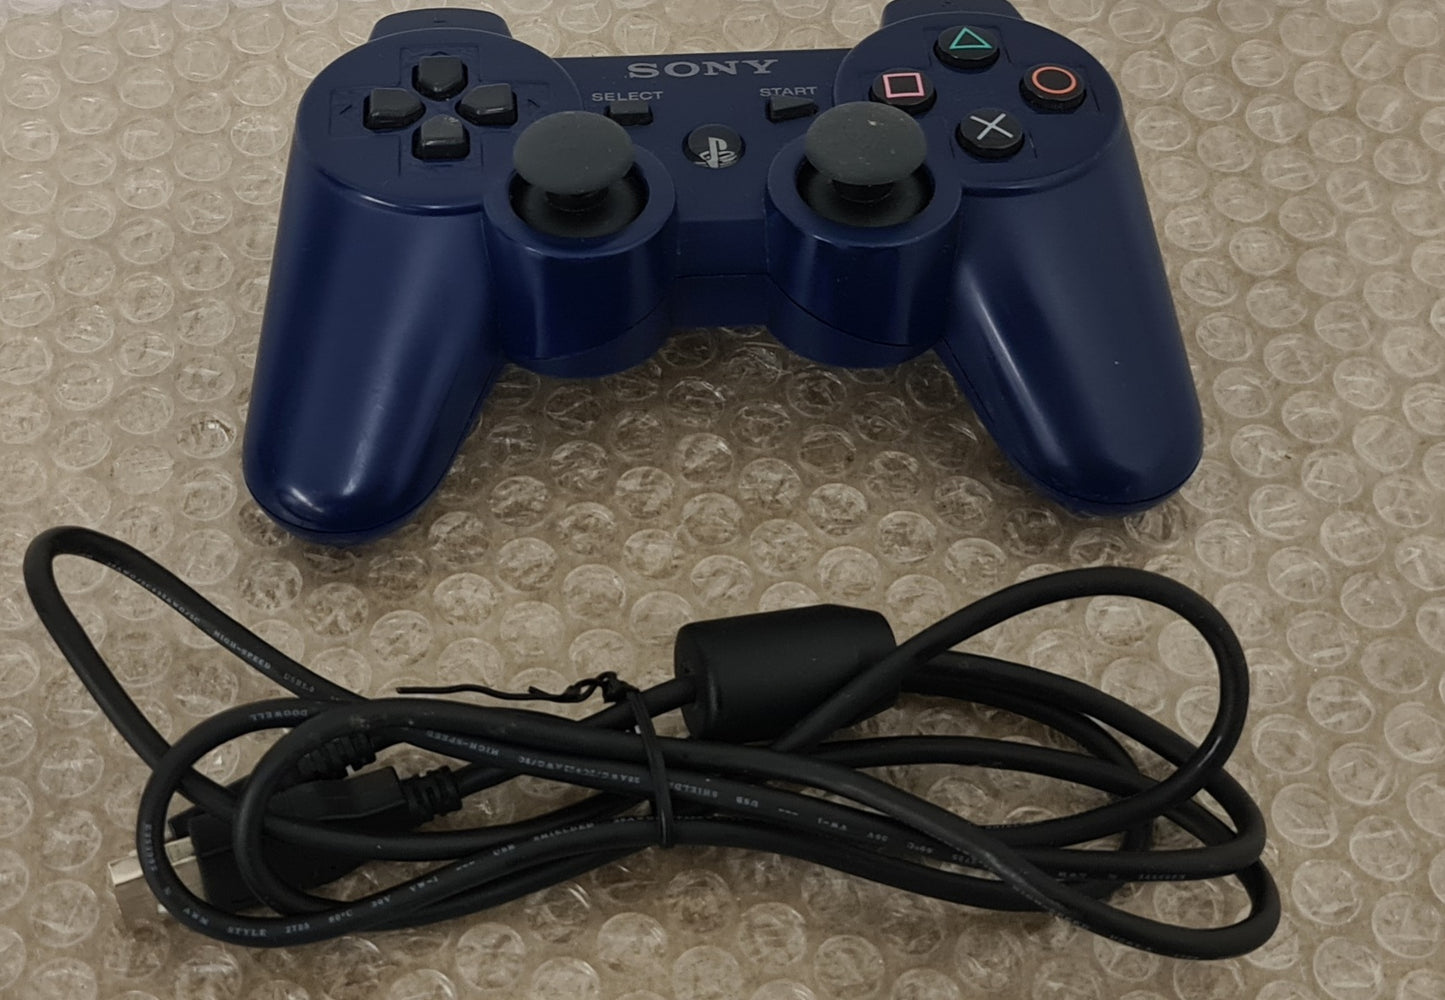 Official Blue Sony Playstation 3 (PS3) Controller with Charging Cable Accessory